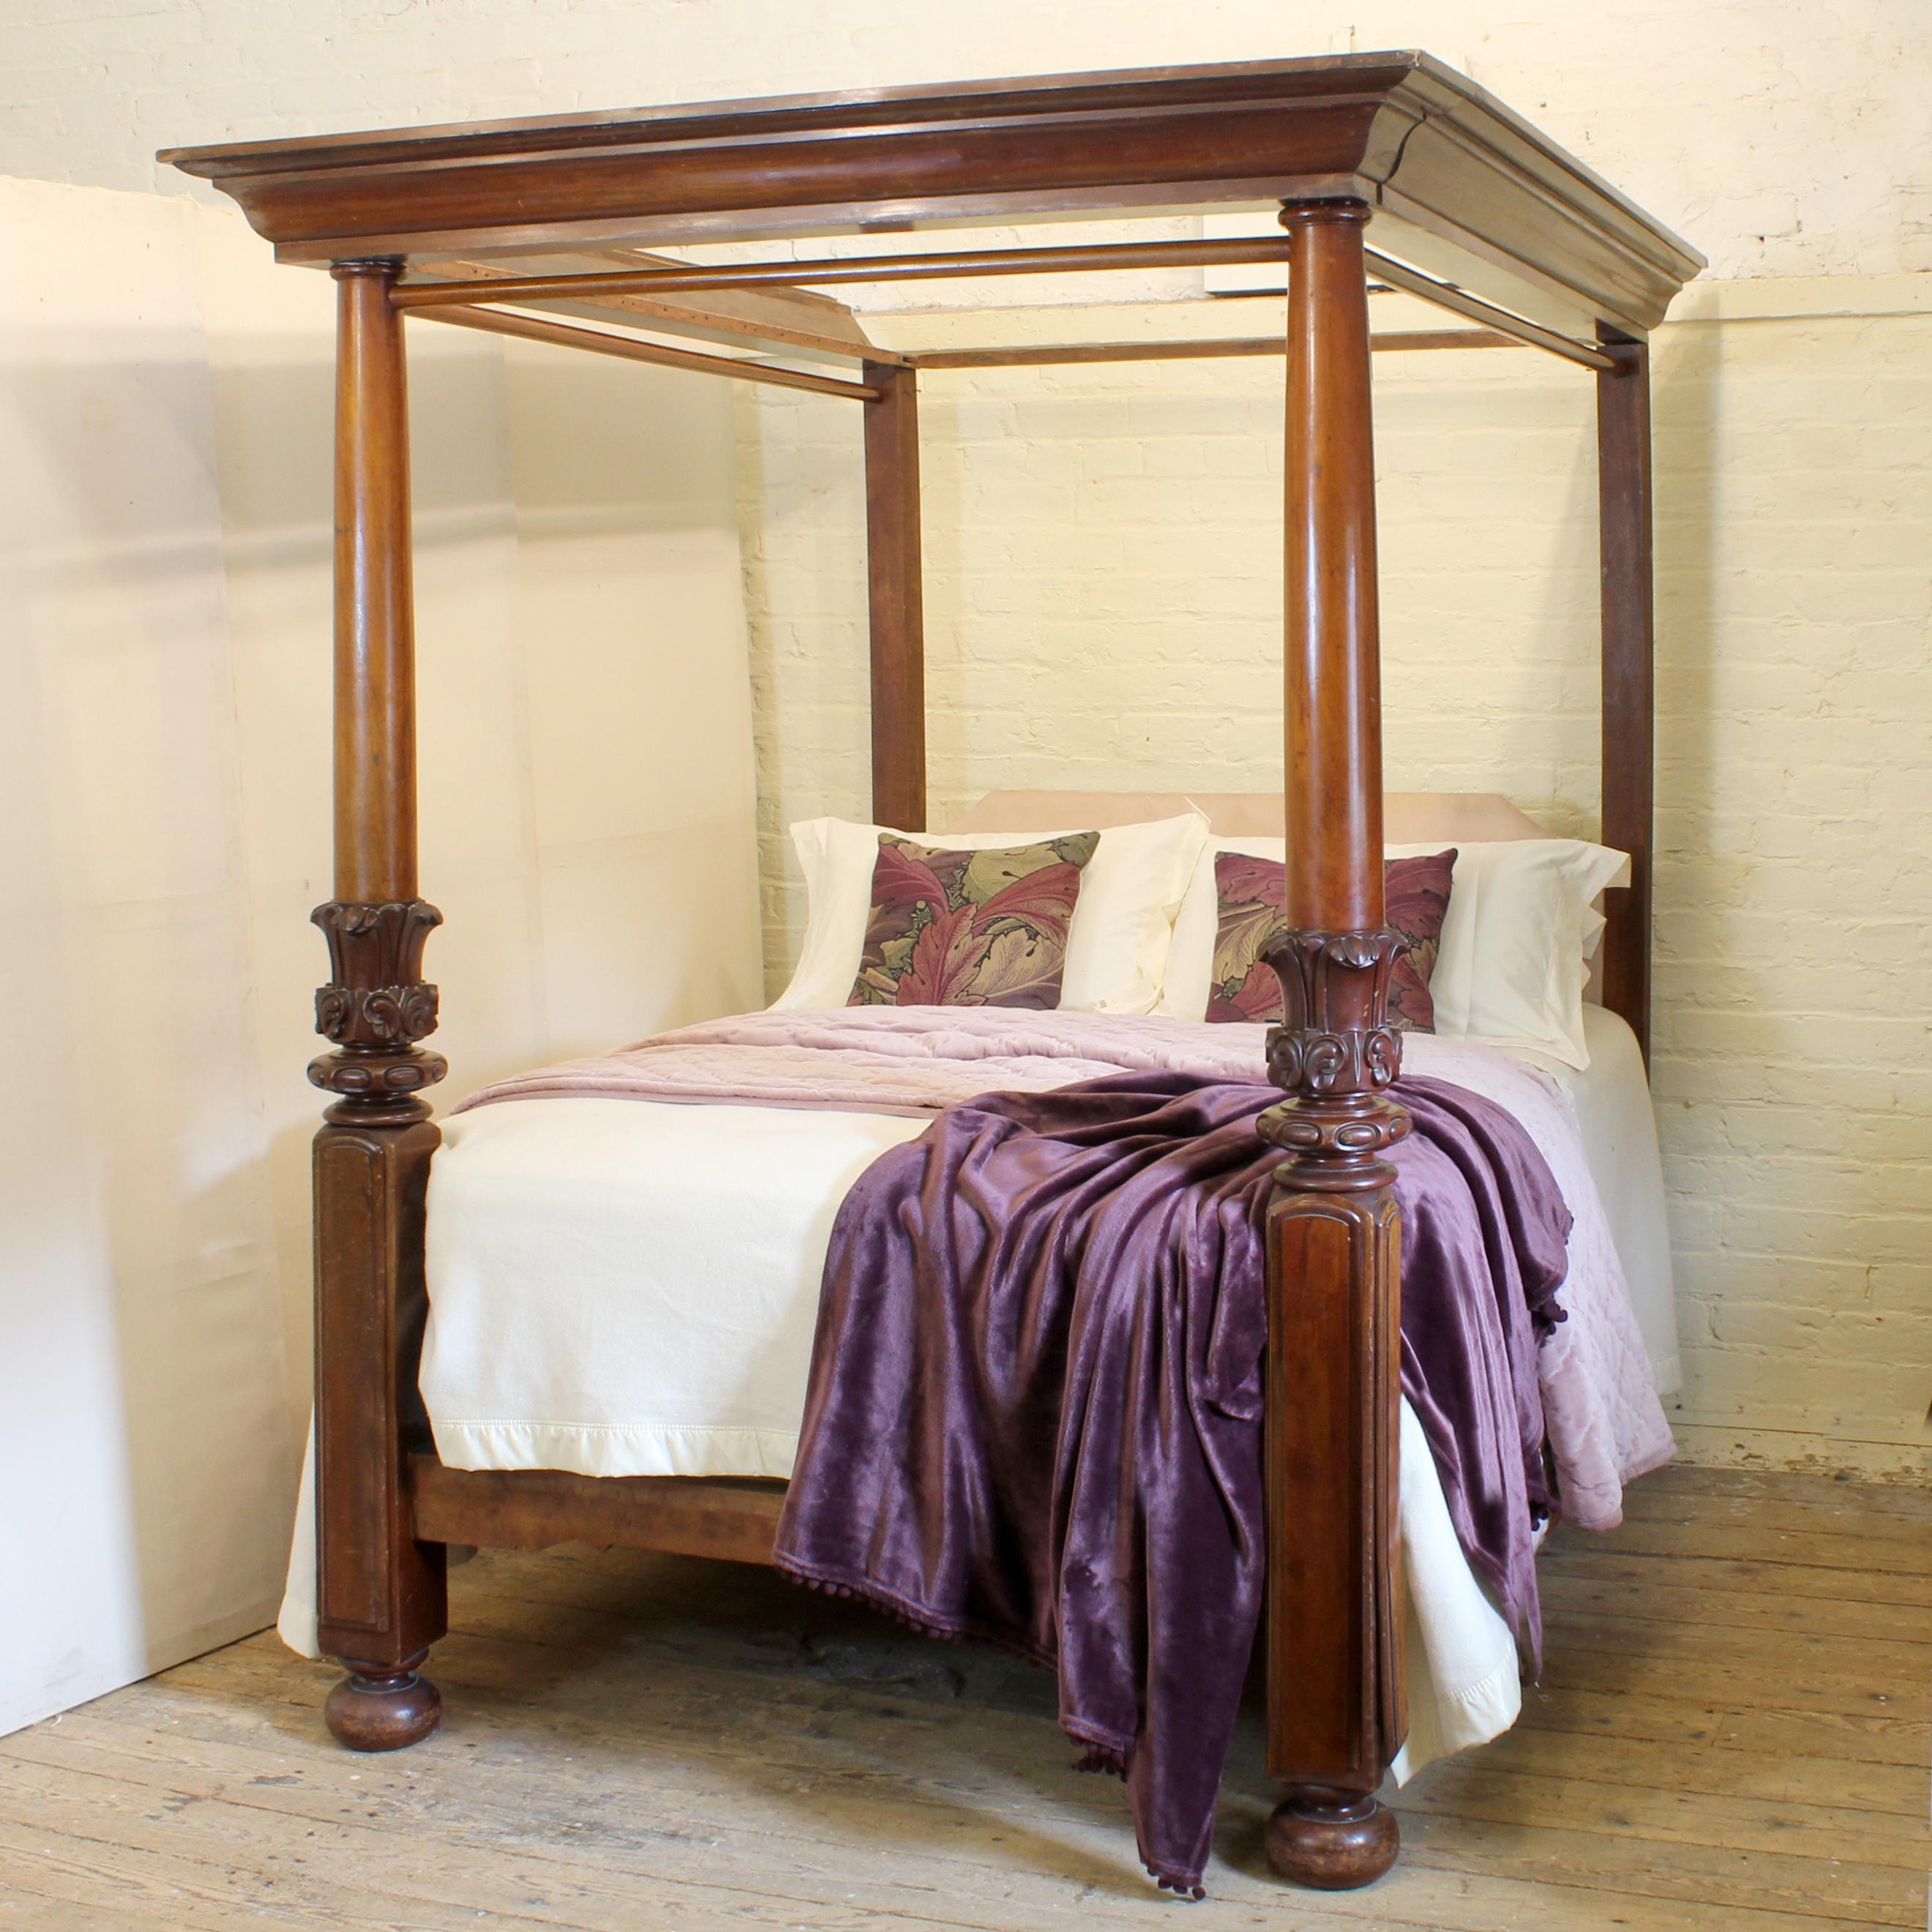 A superb Victorian mahogany four poster bed from the mid Nineteenth Century. The substantial mahogany front posts have bun feet, square section plinths with tall, bevelled and arched cover plates, large bulbous central features of acanthus leaves,